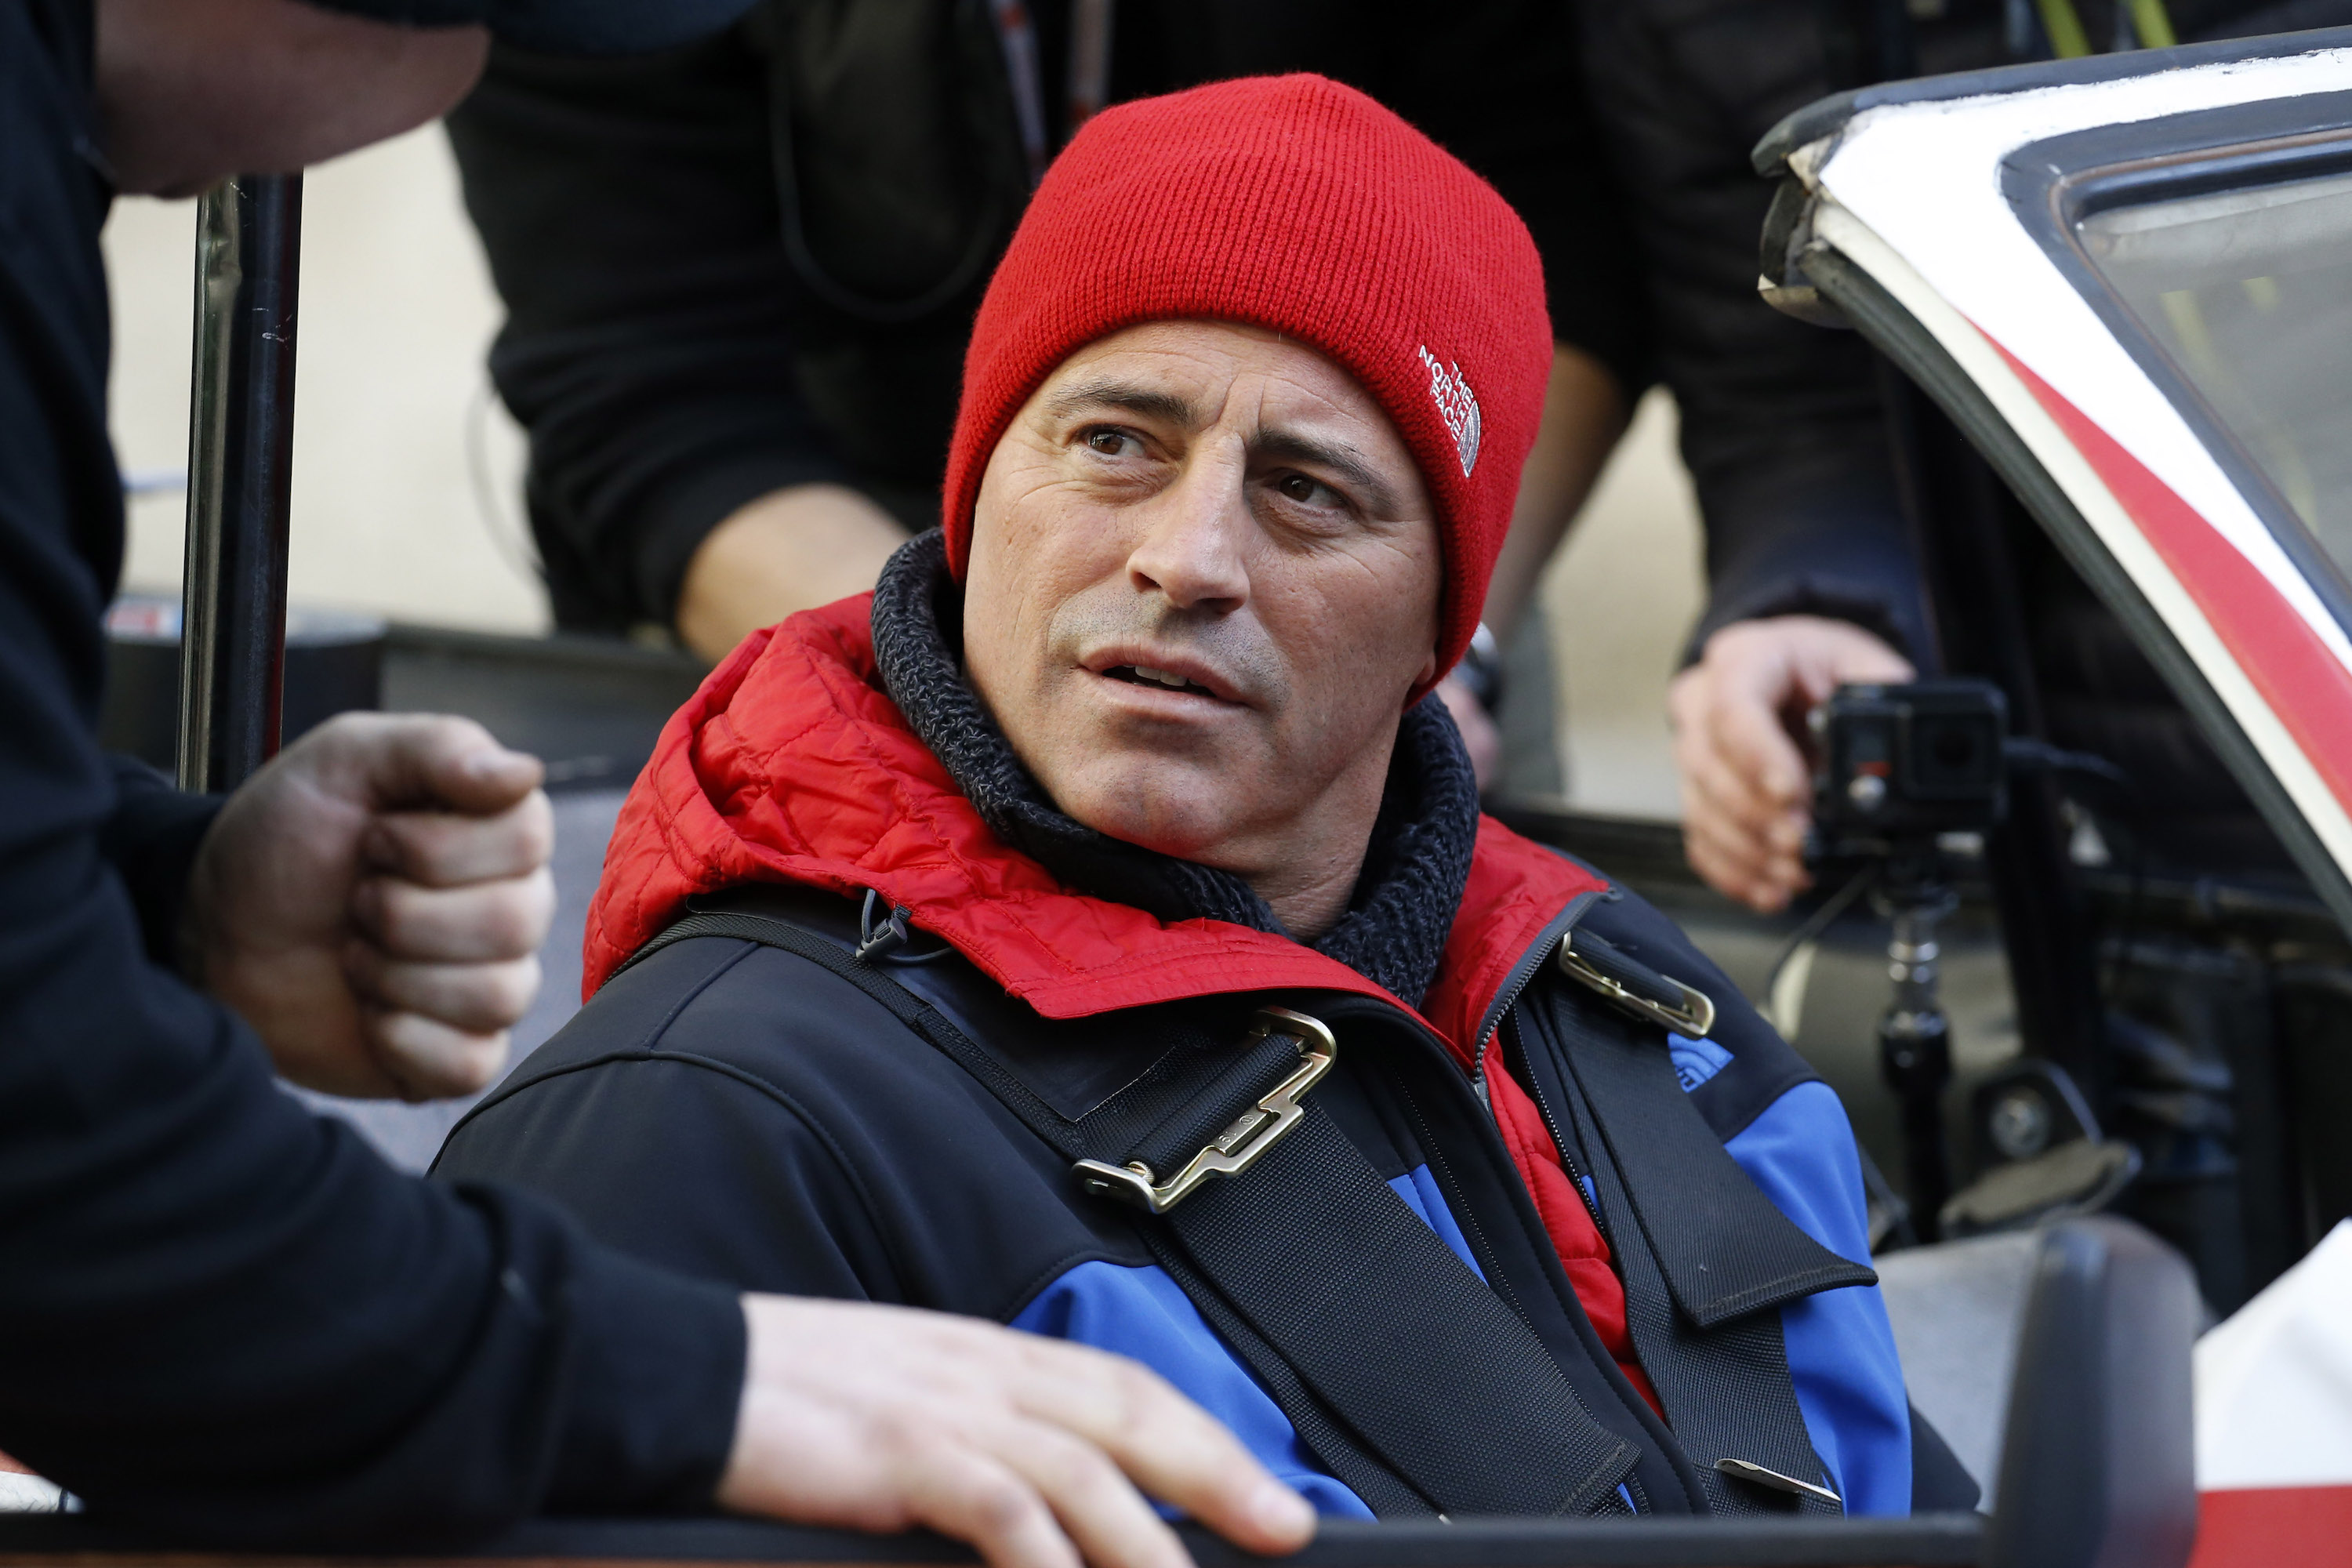 Matt Le Blanc seen filming scenes for 'Top Gear' at the BBC, Portland Place on February 19, 2016 in London, England. (Photo by Alex Huckle/GC Images)